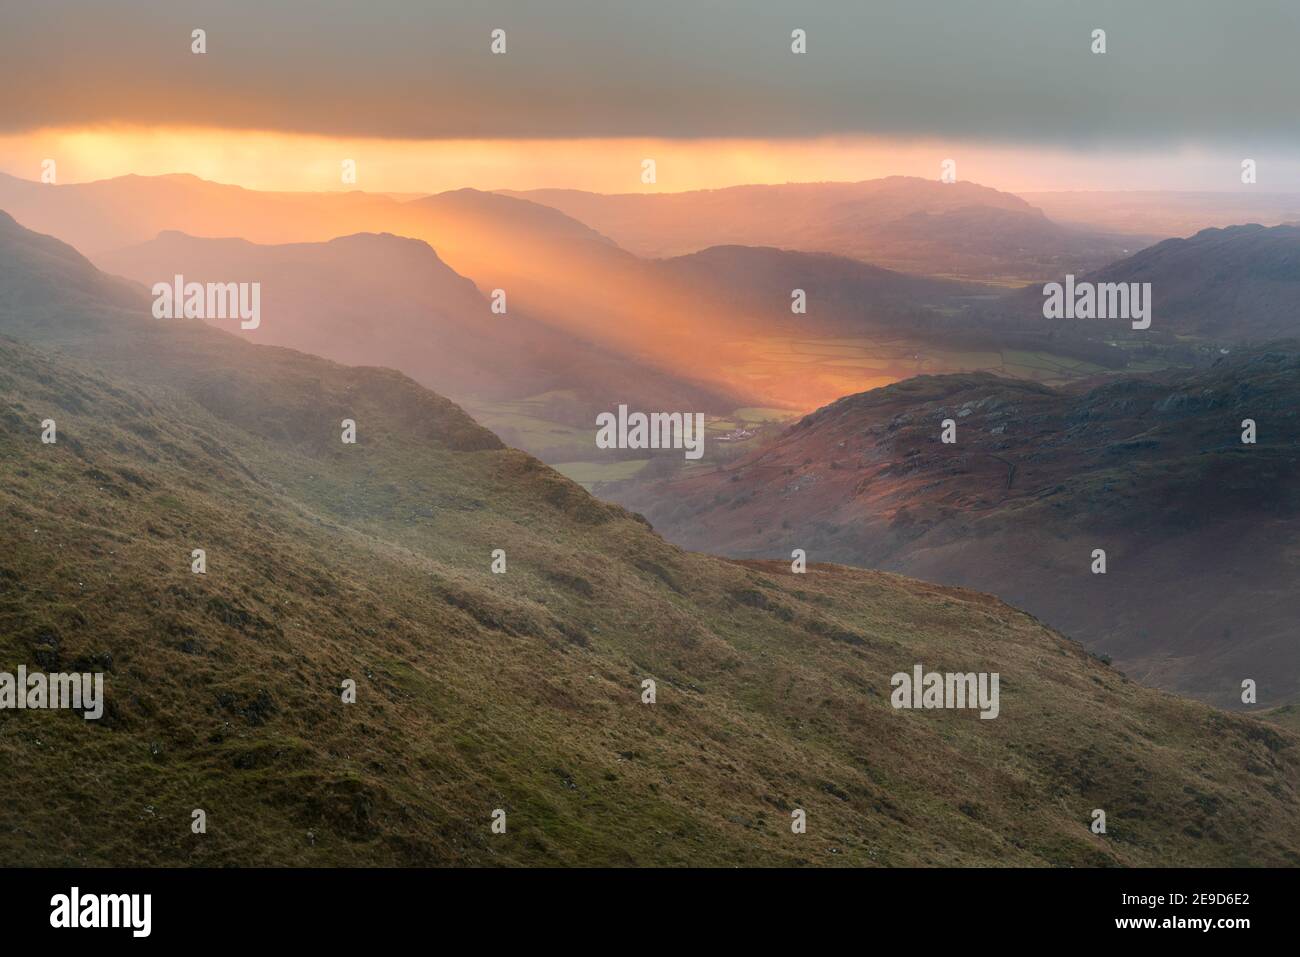 Golden evening light at sunset breaking through clouds onto mountains. Eskdale Valley in the English Lake District. Stock Photo